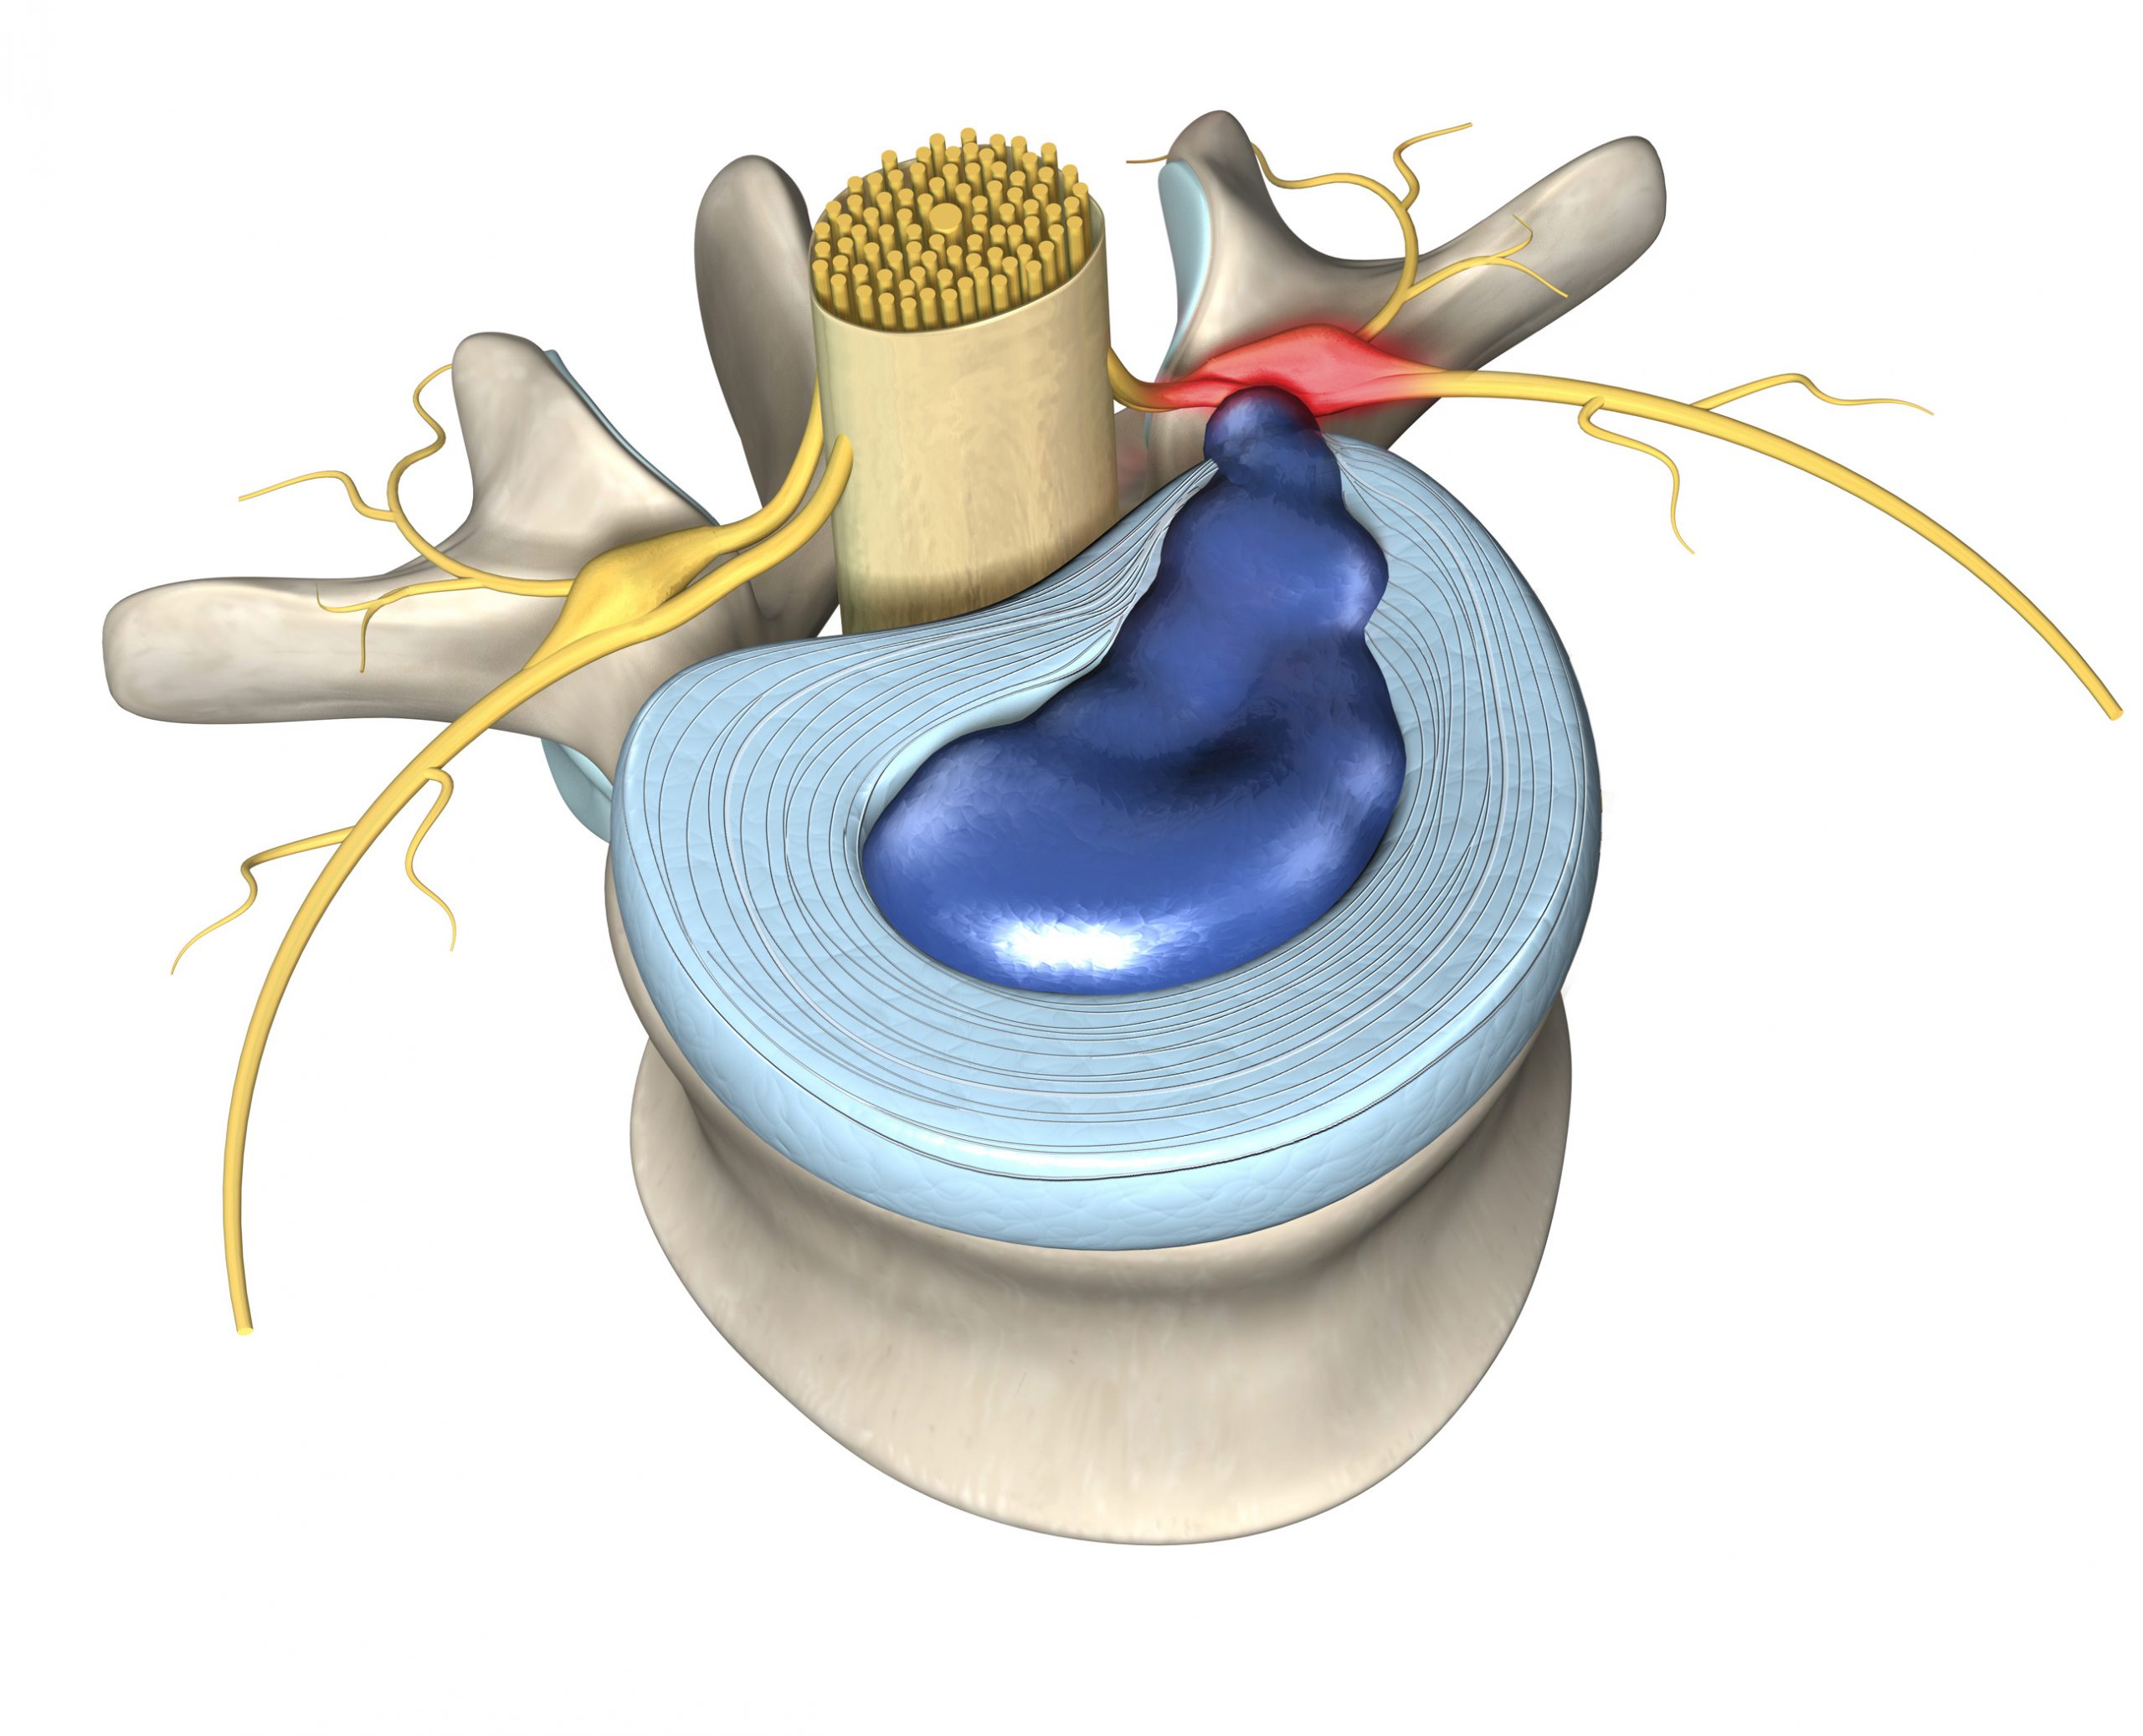 Understanding Herniated Discs  Professional Physical Therapy